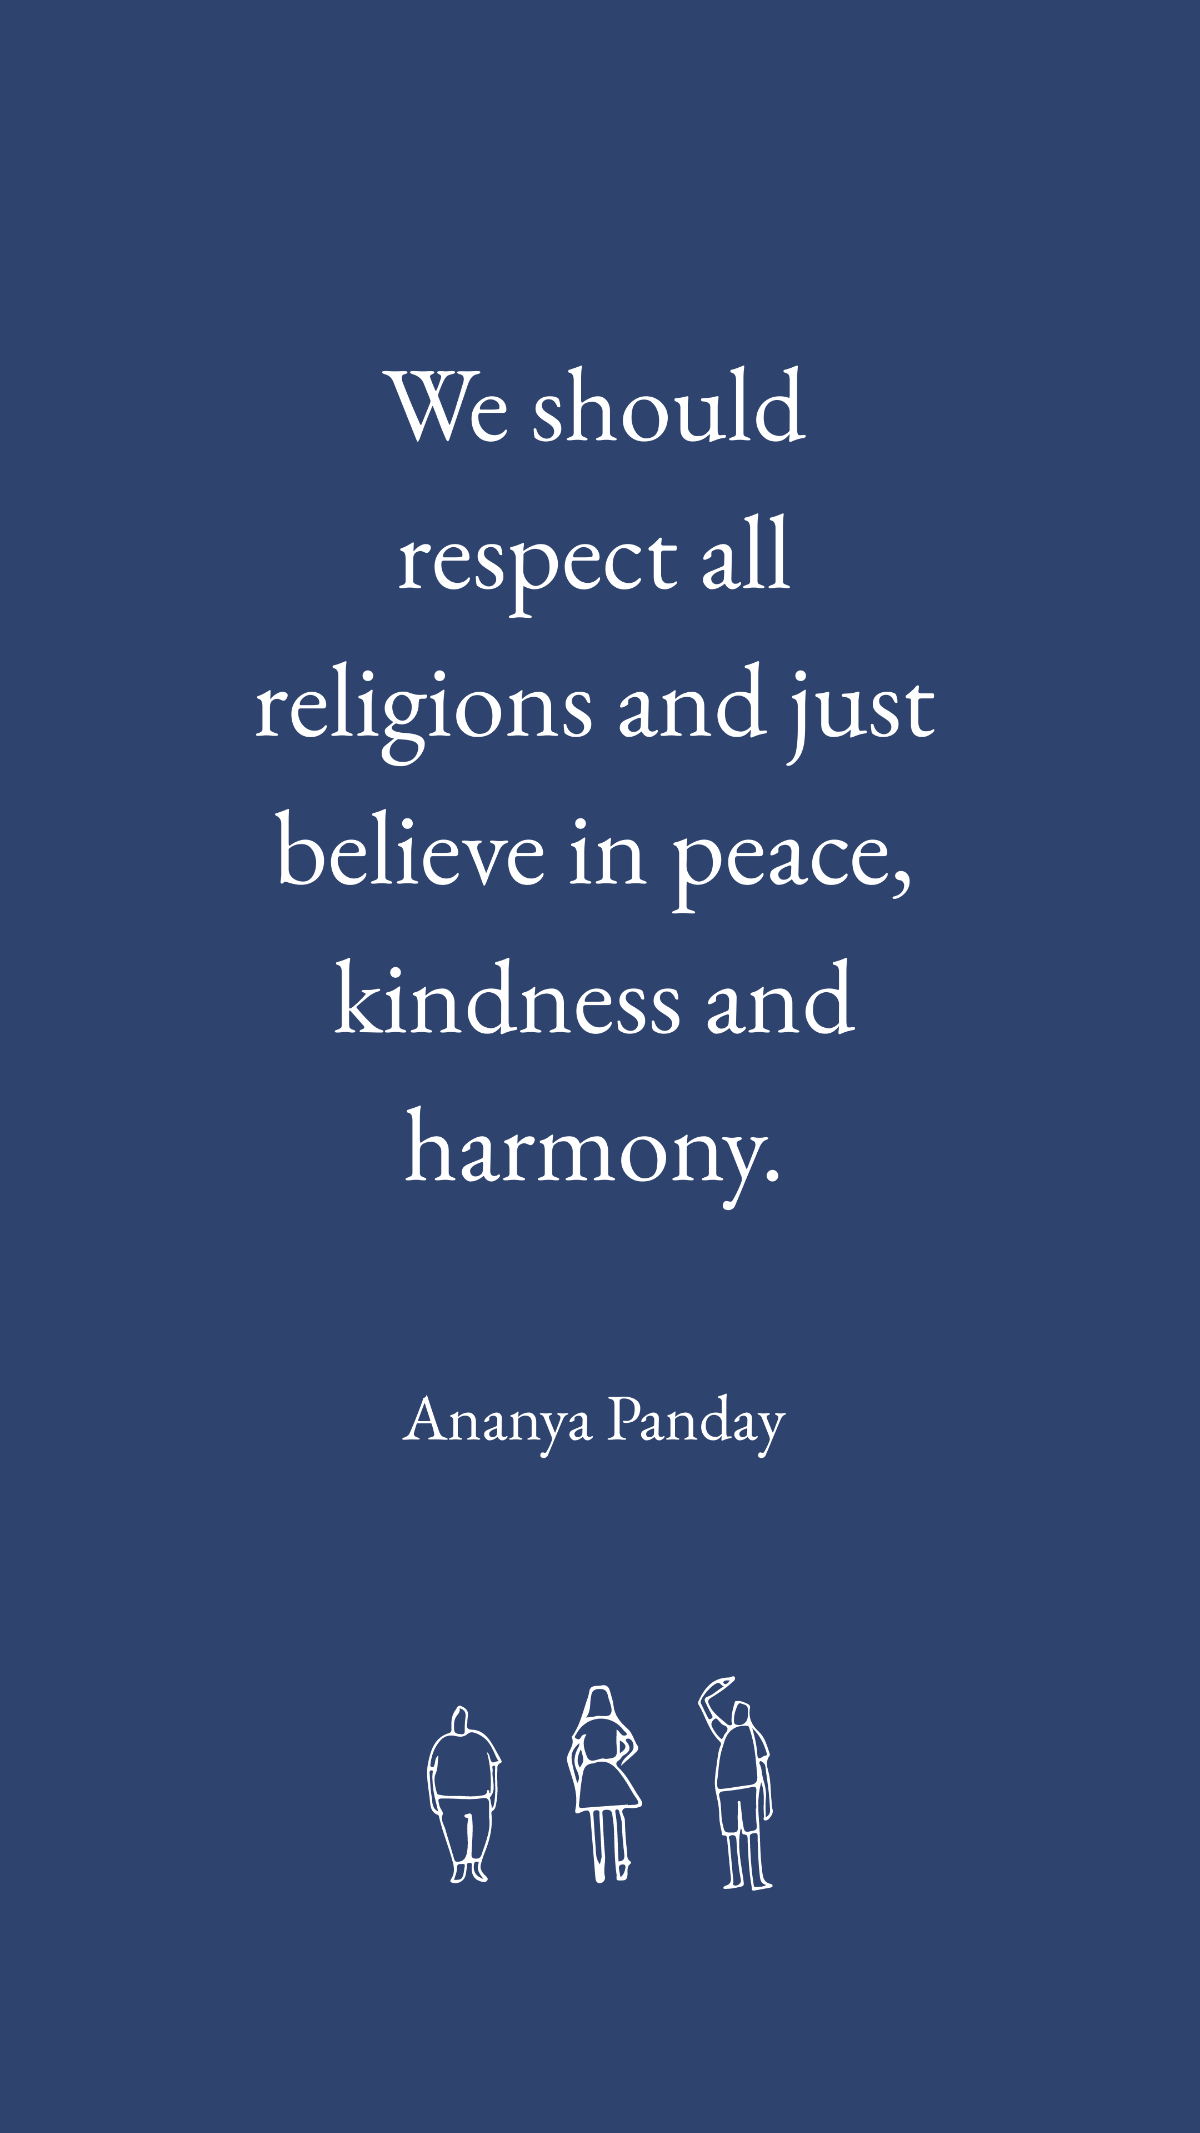 Ananya Panday - We should respect all religions and just believe in peace, kindness and harmony. Template